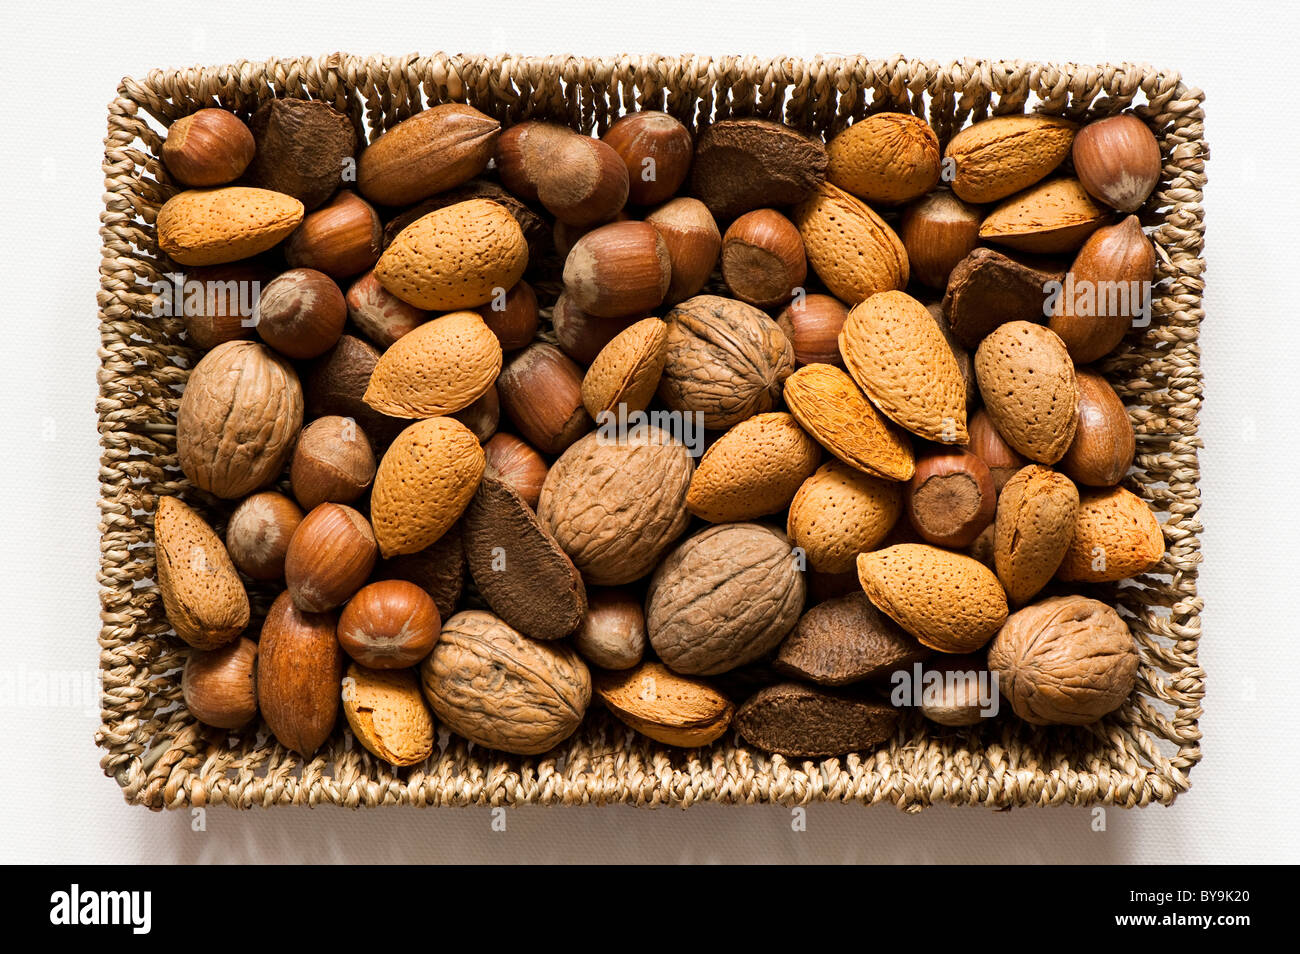 Mixed edible nuts in a basket Stock Photo